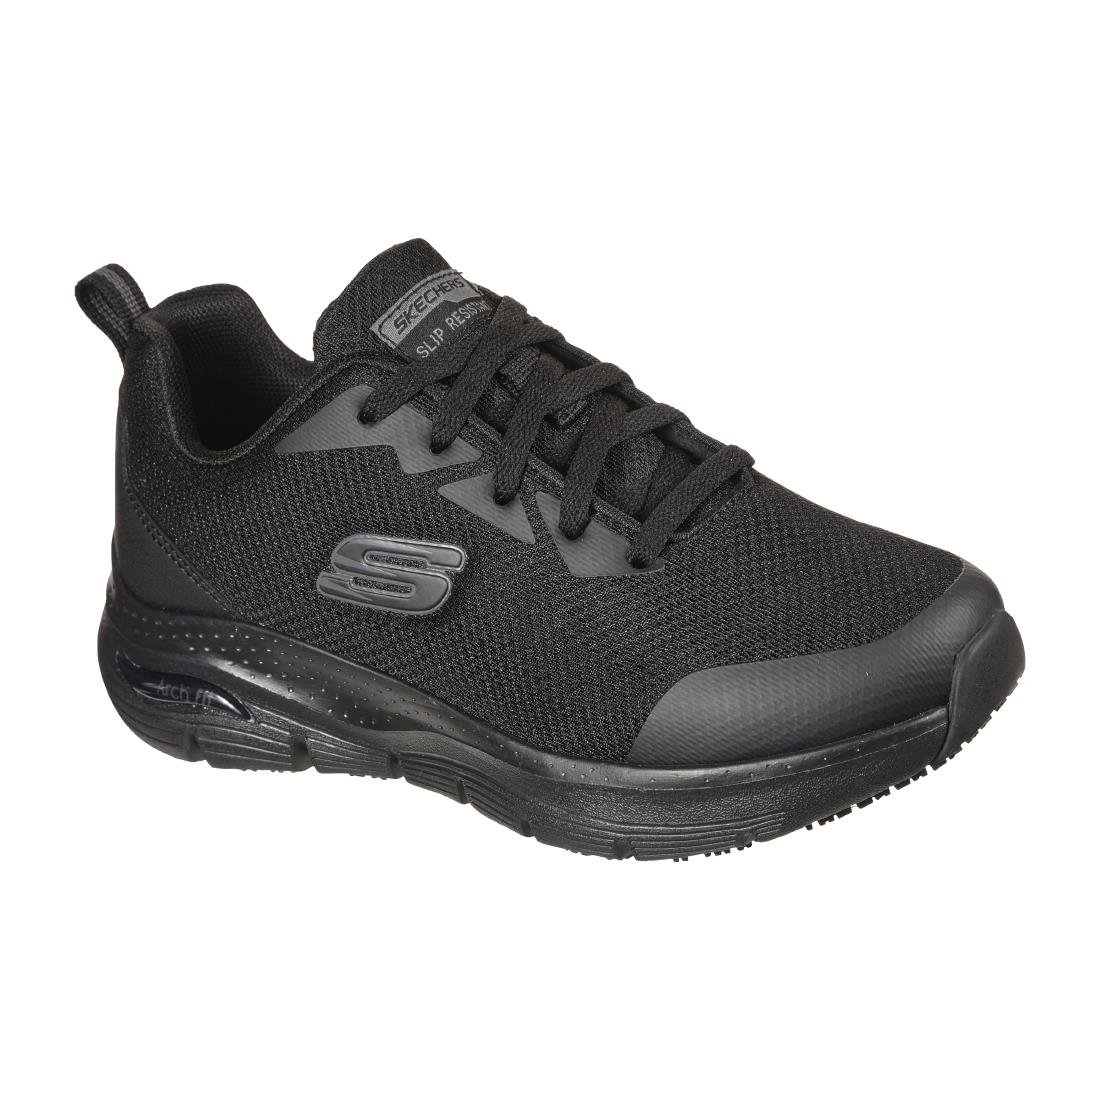 BB671-40 Skechers Womens Slip Resistant Arch Fit Trainer Size 40 JD Catering Equipment Solutions Ltd